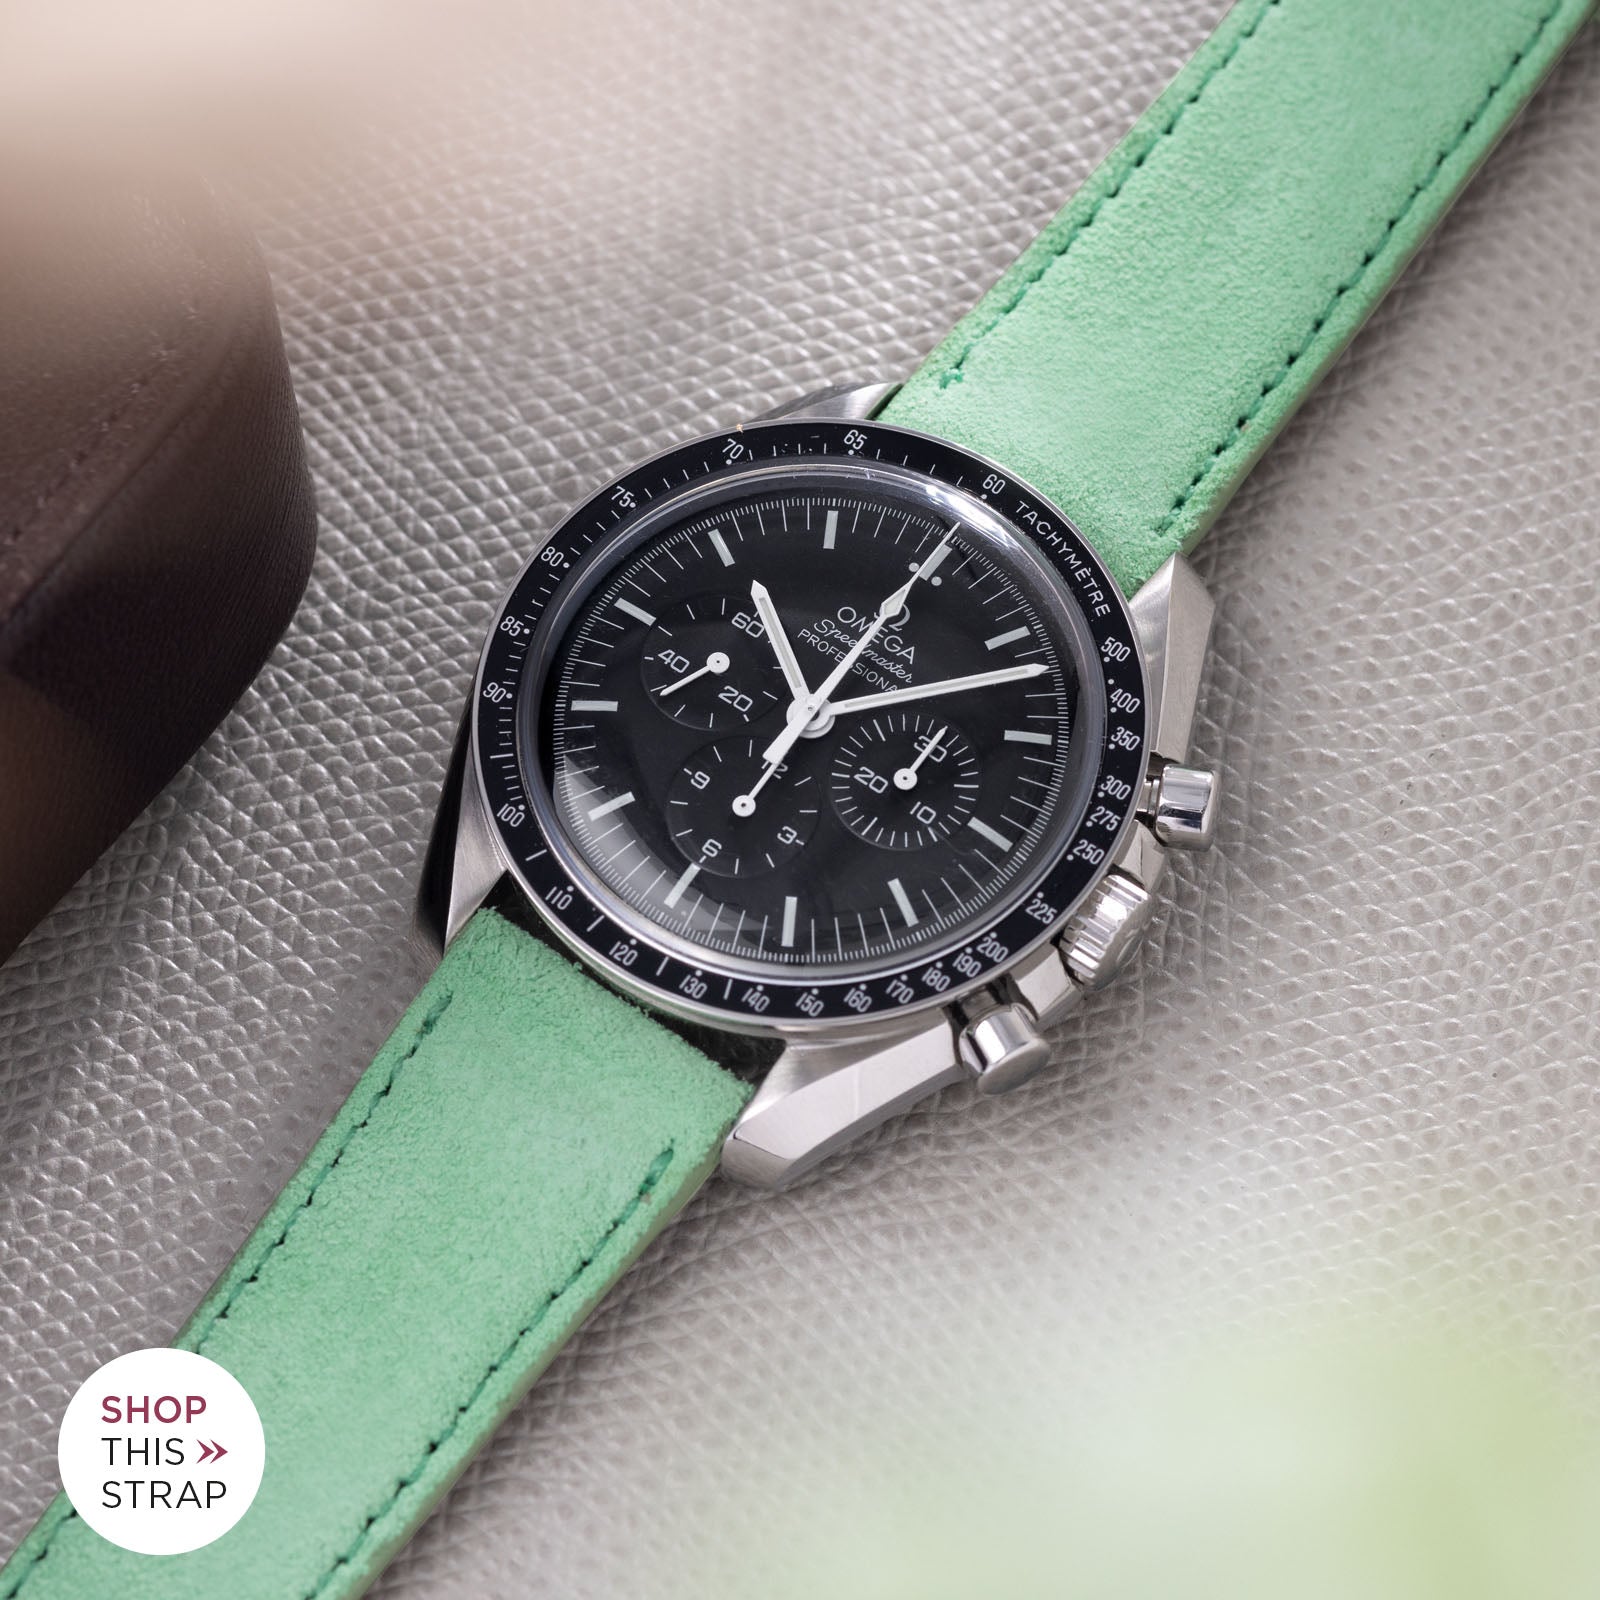 Mint Suede Leather Watch Stap